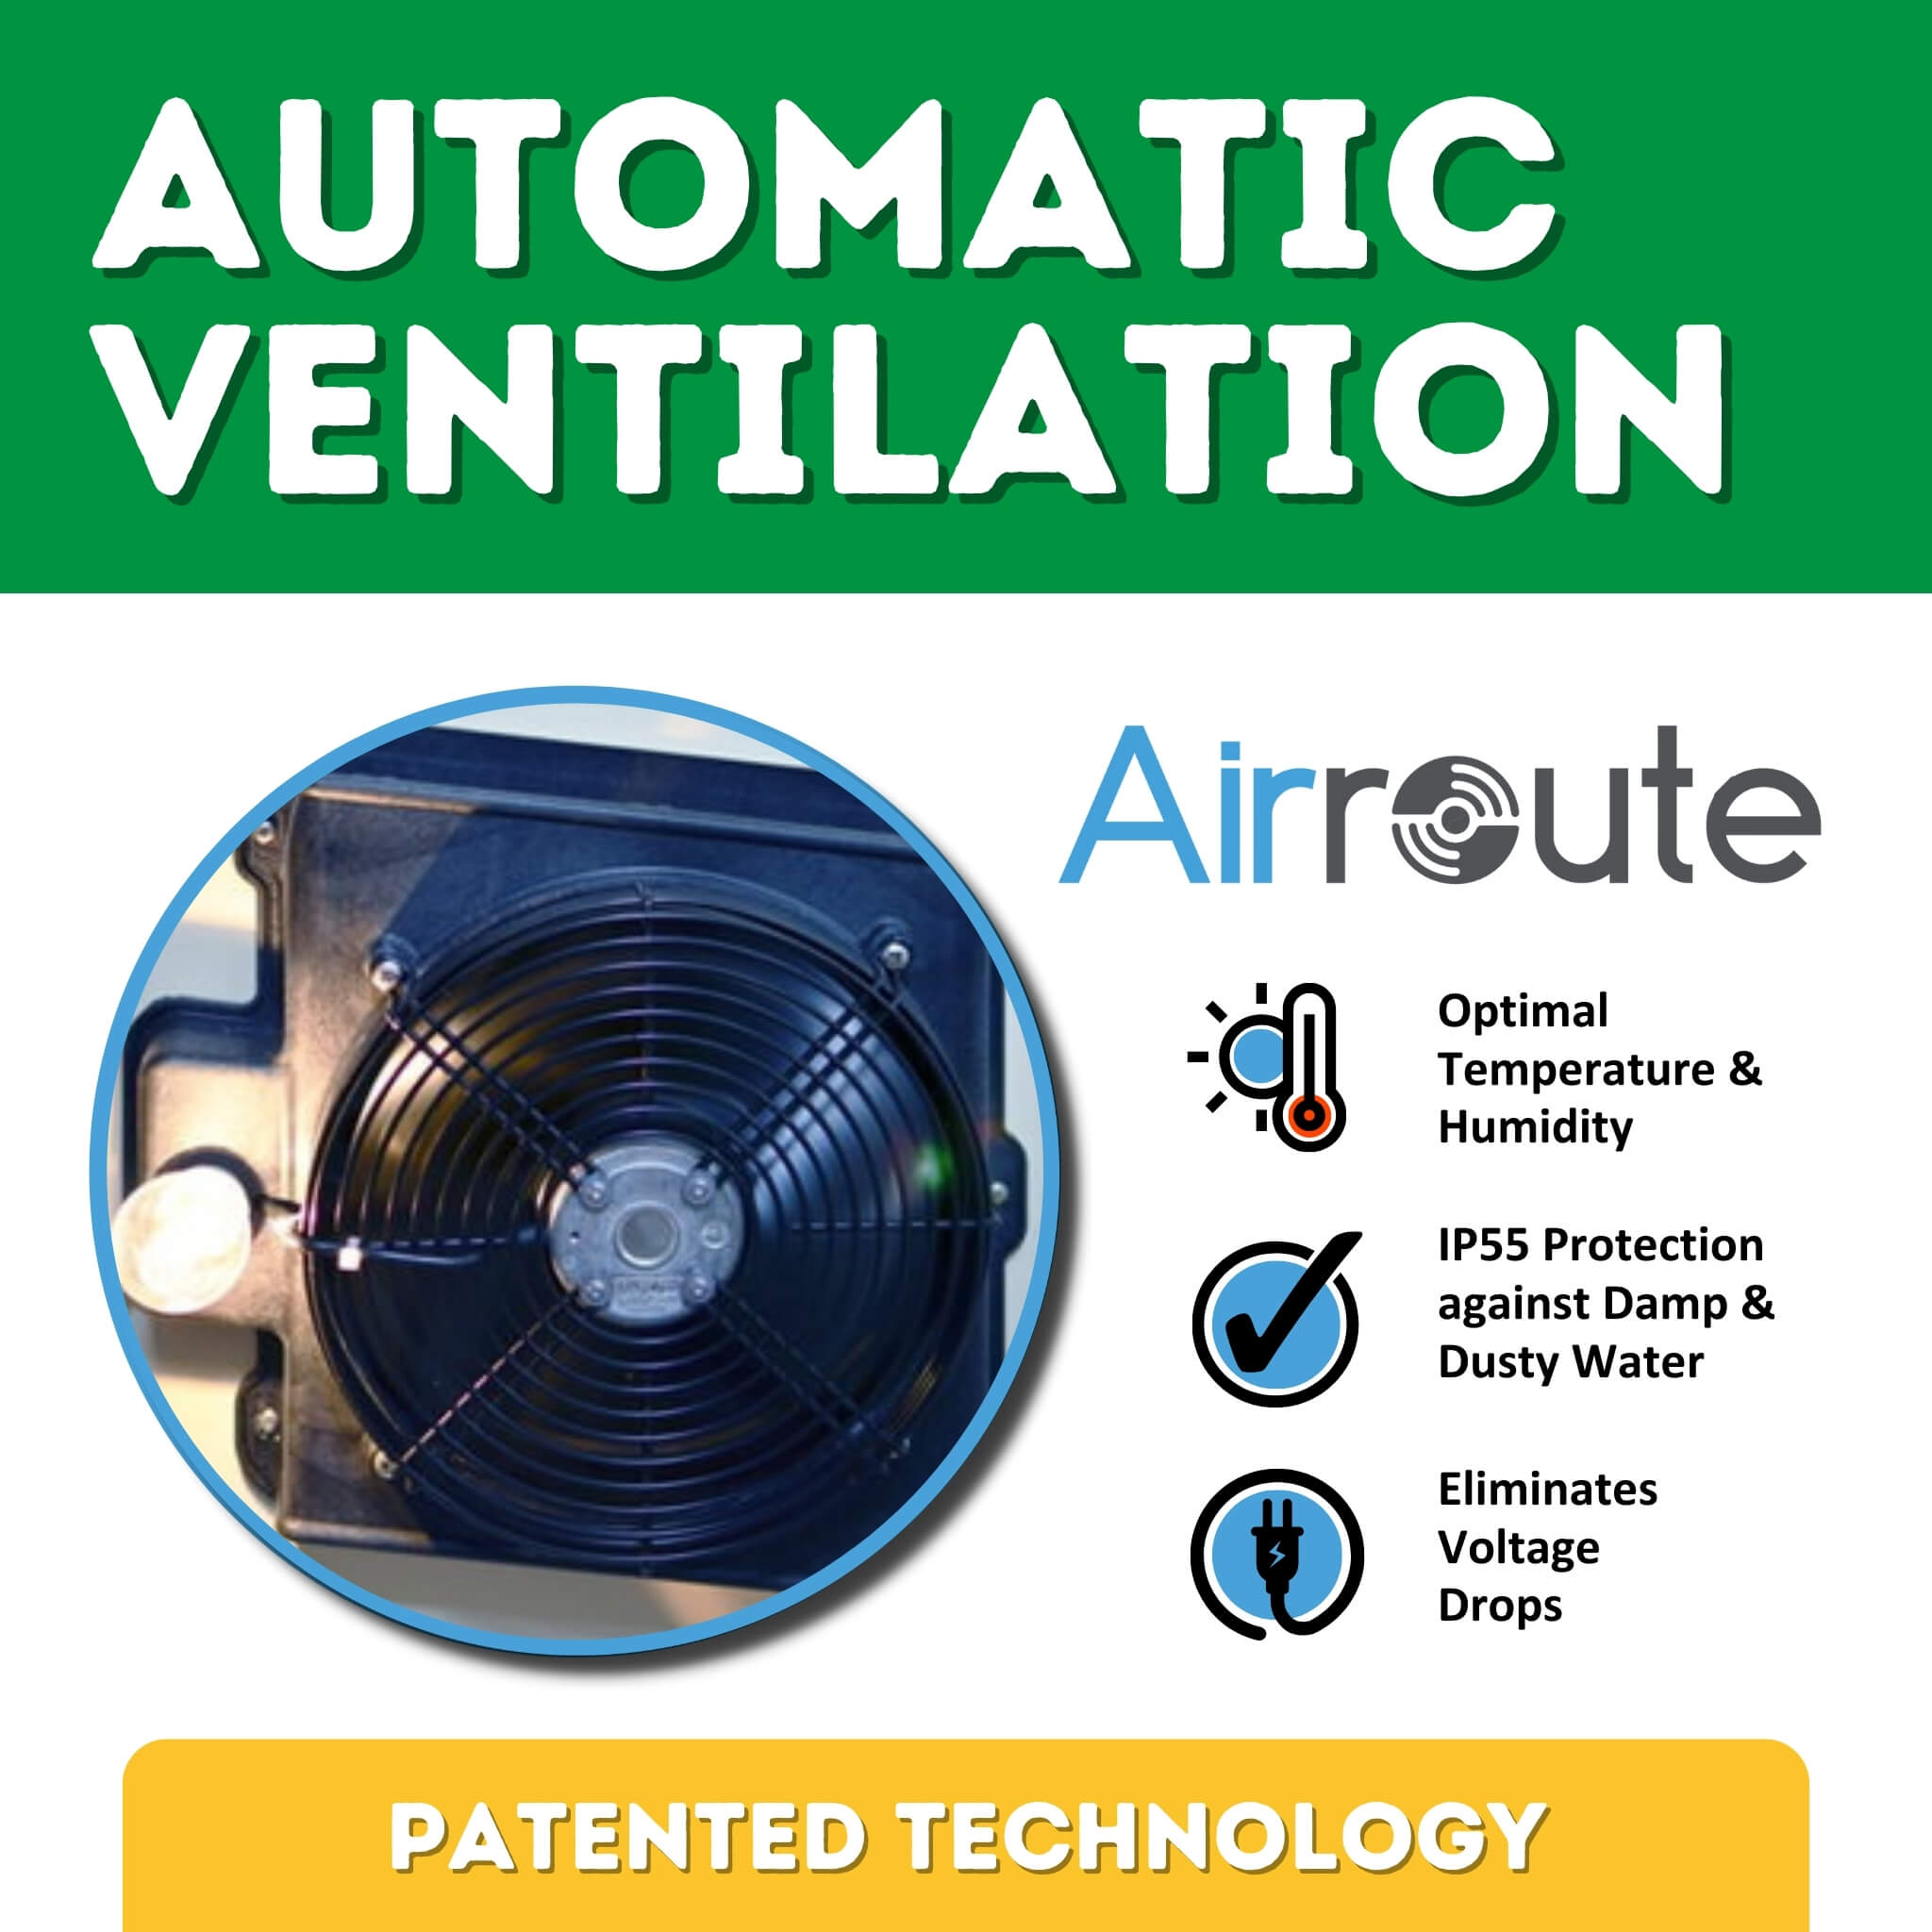 Hatching Time Cimuka. Infographic showing built-in automatic ventilation. Patented Airroute technology is listed as providing protection against voltage drops, dirty water and helps maintain optimal temperature and humidity for successful poultry hatching.